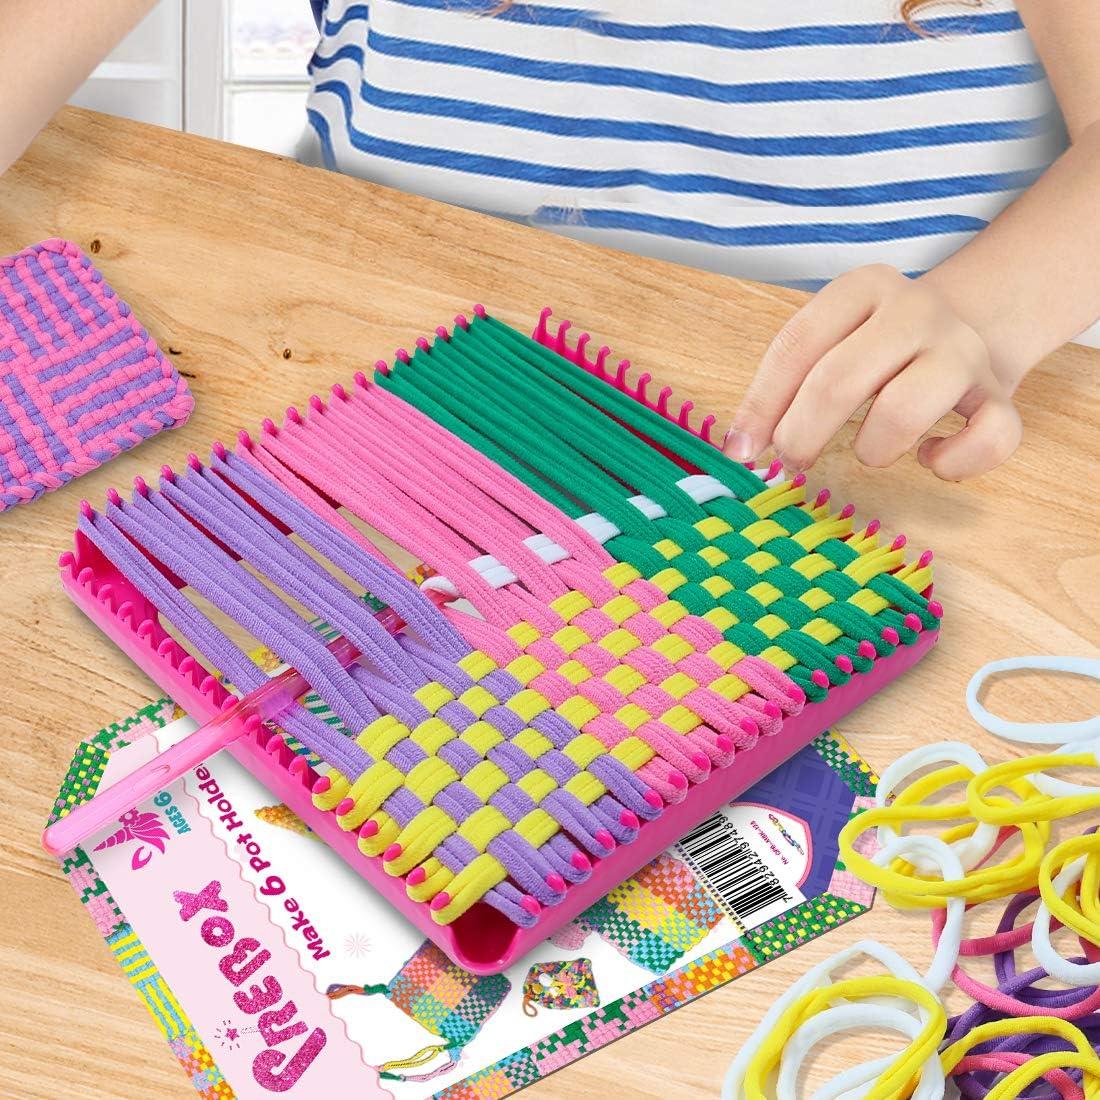 7 Colorful Weaving Loom Craft Kit, Unleash Creative Imagination for Kids  Aged 5+, Perfect Christmas Gift Idea For Girls